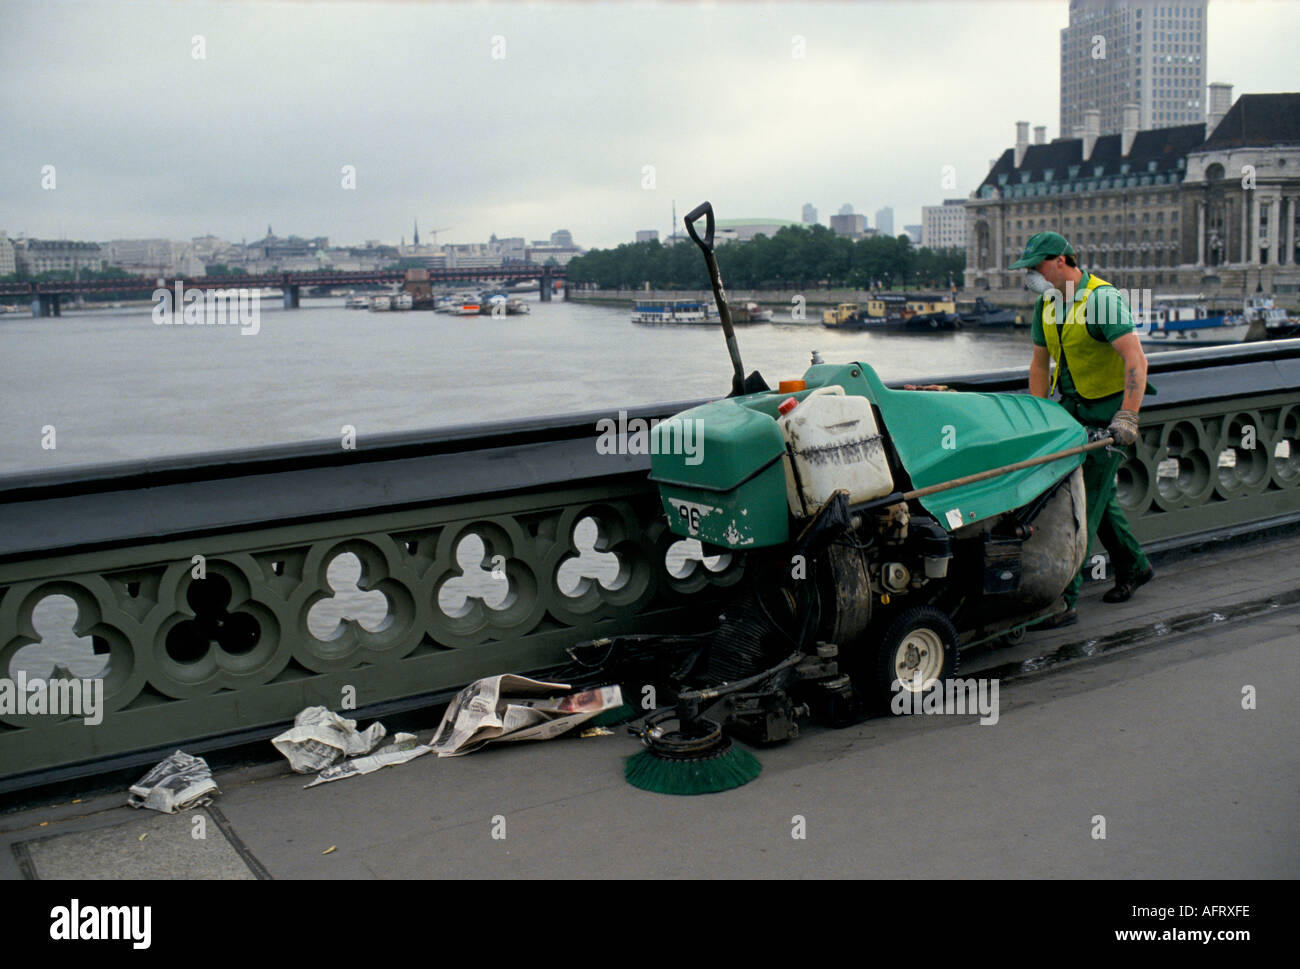 [Street cleaner] 'House of Parliament'  London England 'westminster bridge' Stock Photo